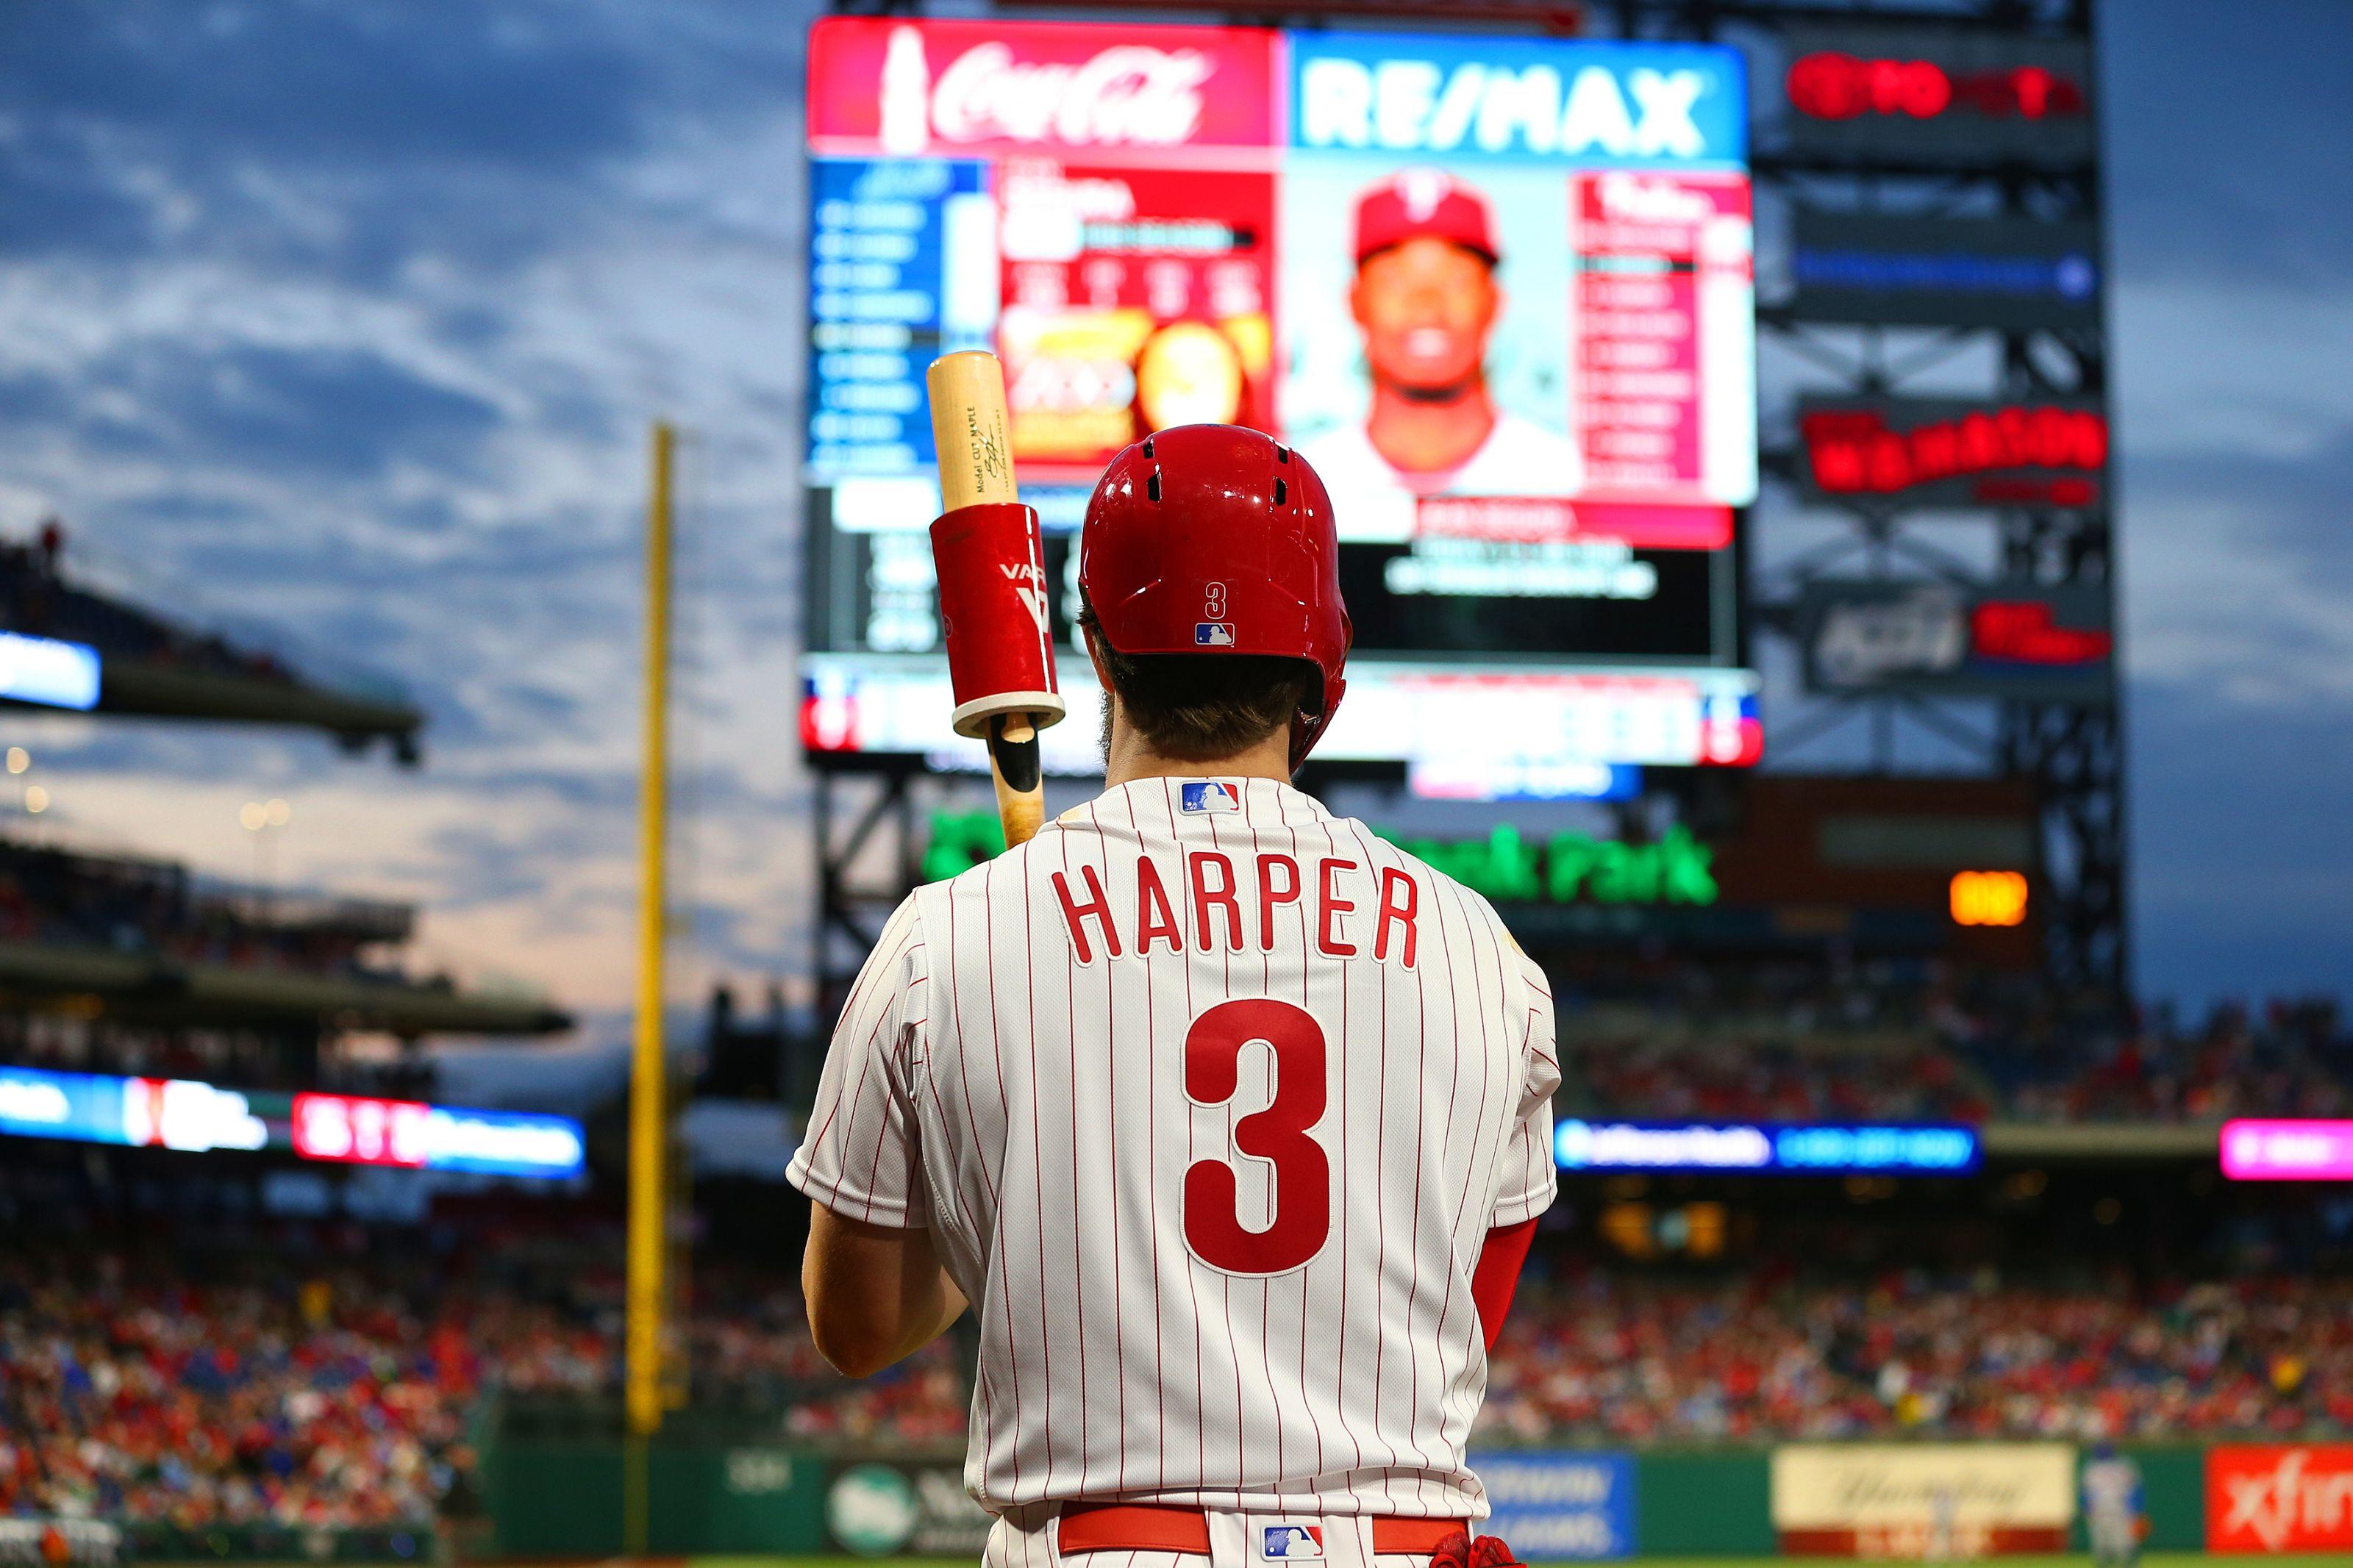 Phillies fans out of luck as counterfeit Bryce Harper